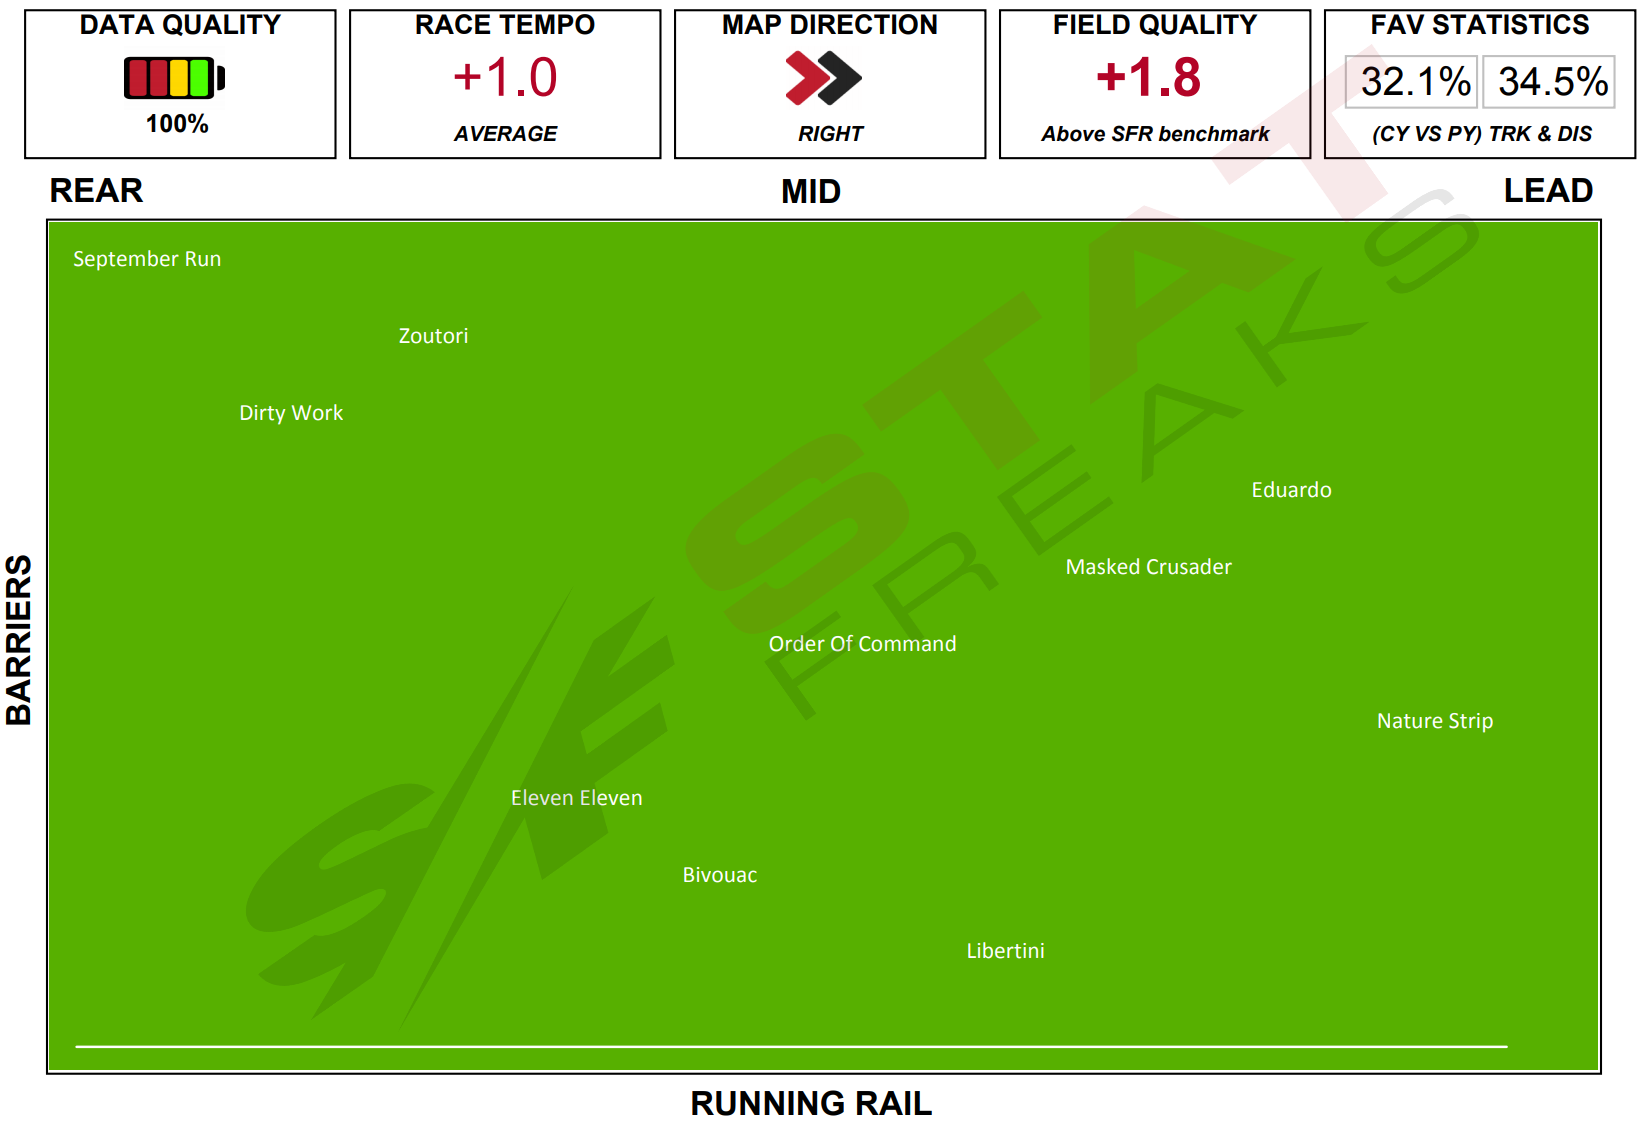 Click here to enlarge Royal Randwick Race 8 Speed Map 10th April 2021 Statfreaks.com.au